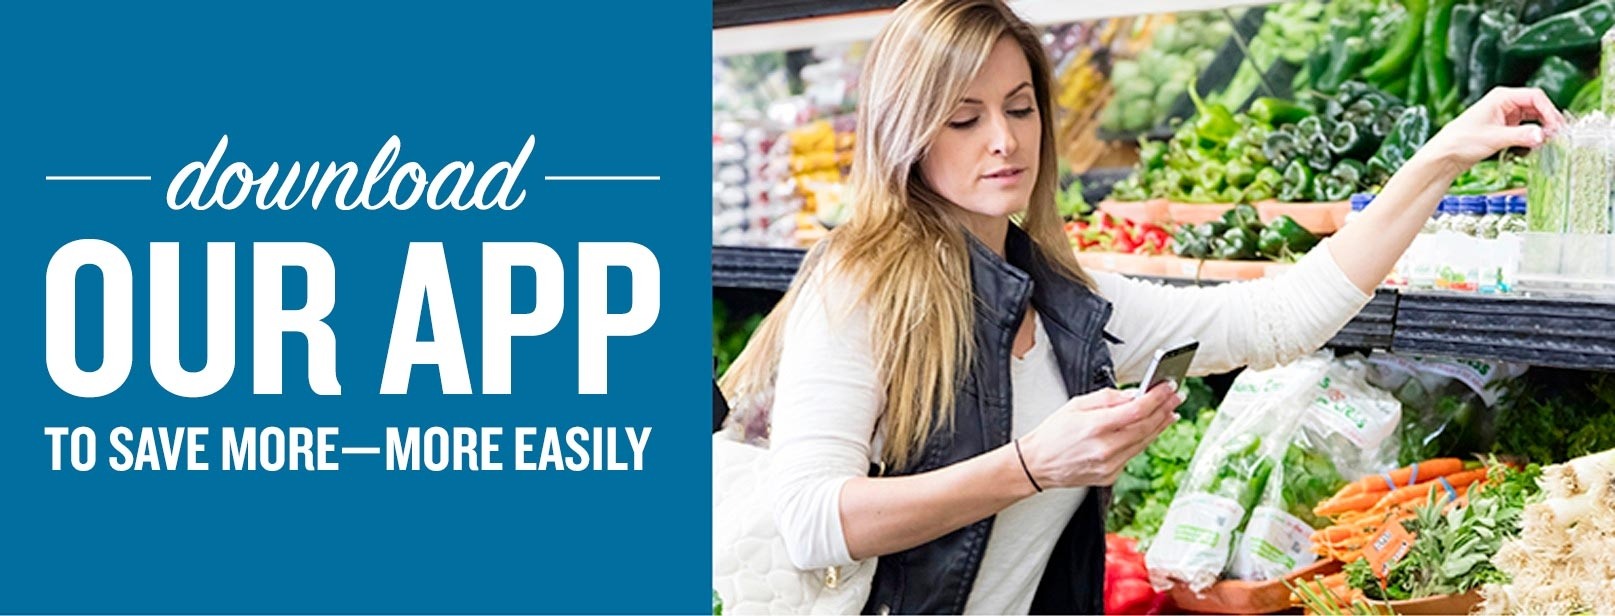  Download our app to save more - more easily, woman shopping for produce while looking at mobile phone